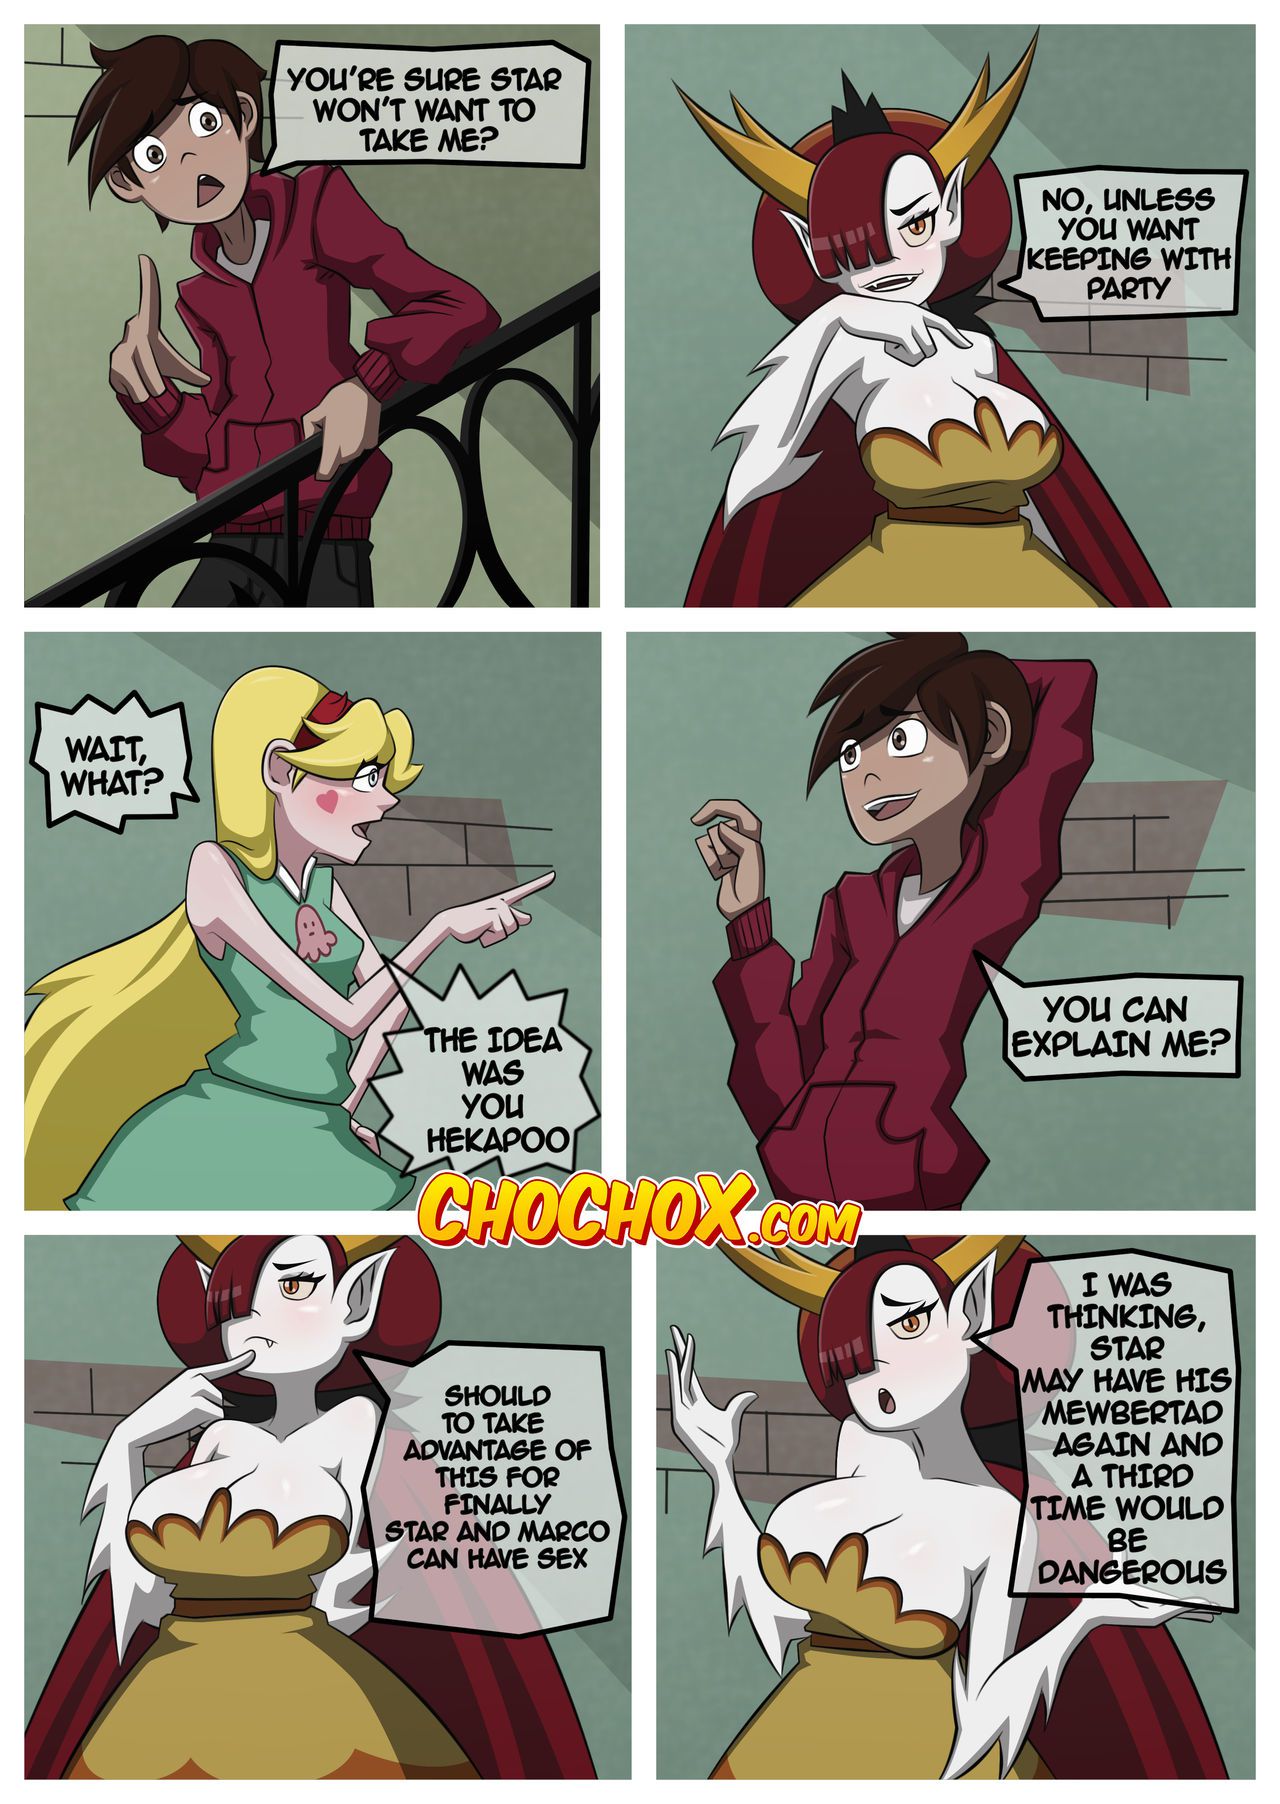 [Crock Comix] Hekapoo Plan’s - Sexberty 1 [ChoChoX] (Star Vs. The Forces of Evil) 12